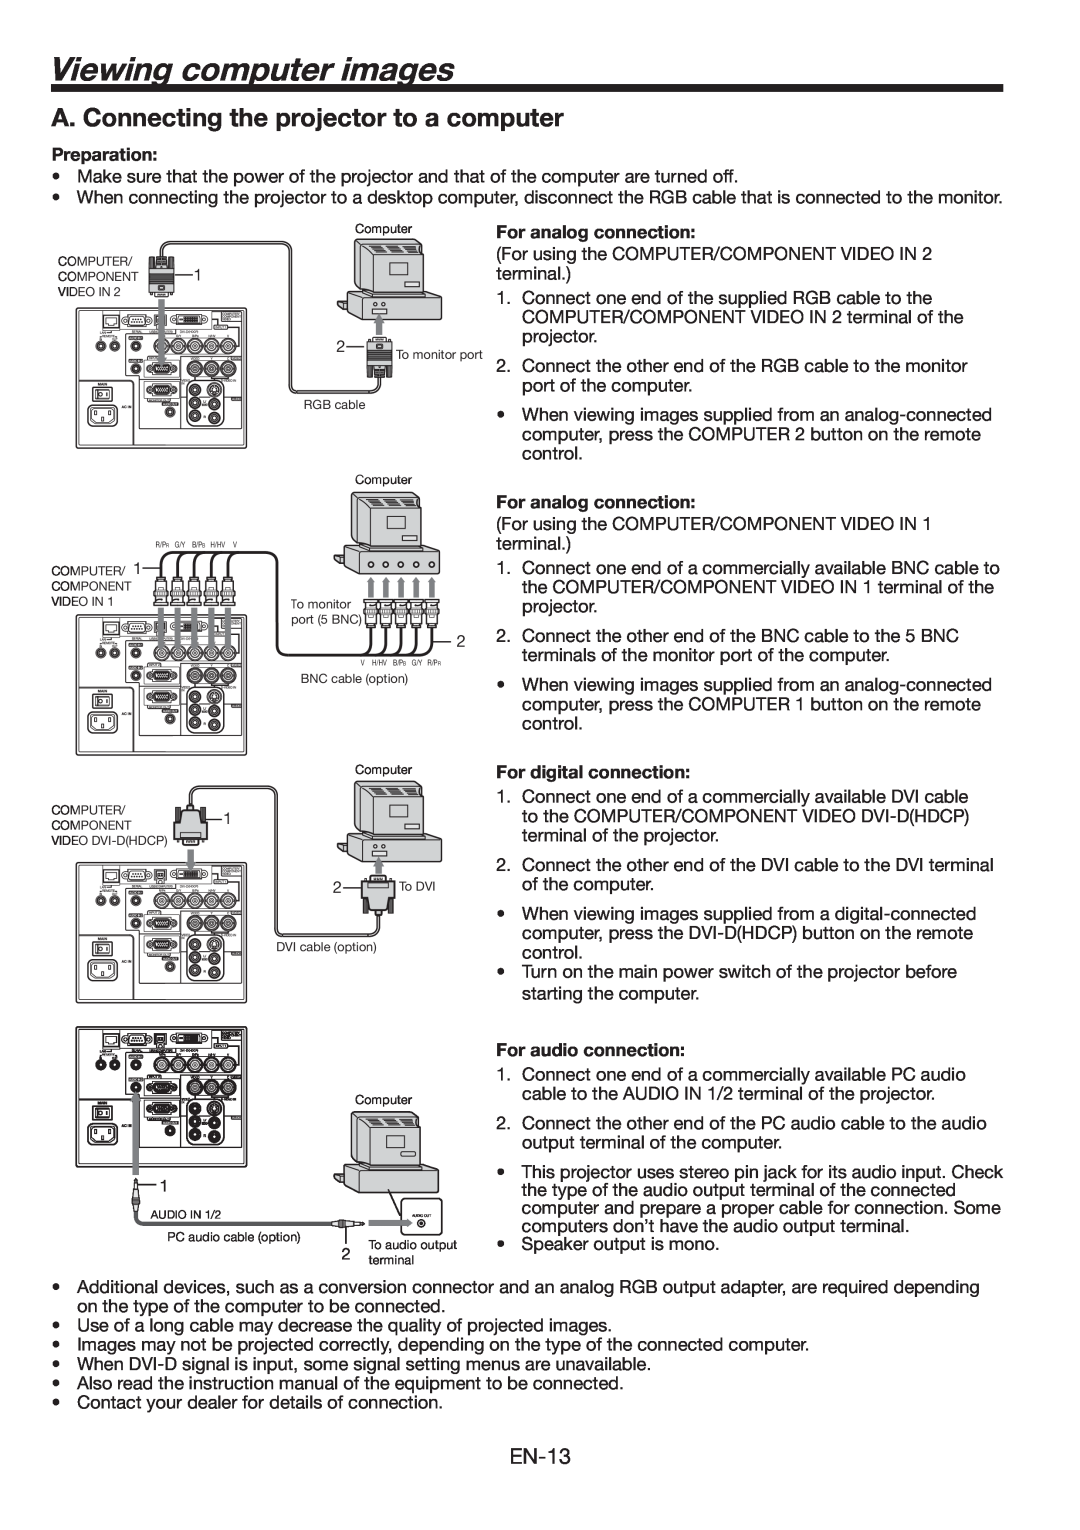 Mitsubishi Electronics FL6900U user manual Viewing computer images, A. Connecting the projector to a computer, Preparation 